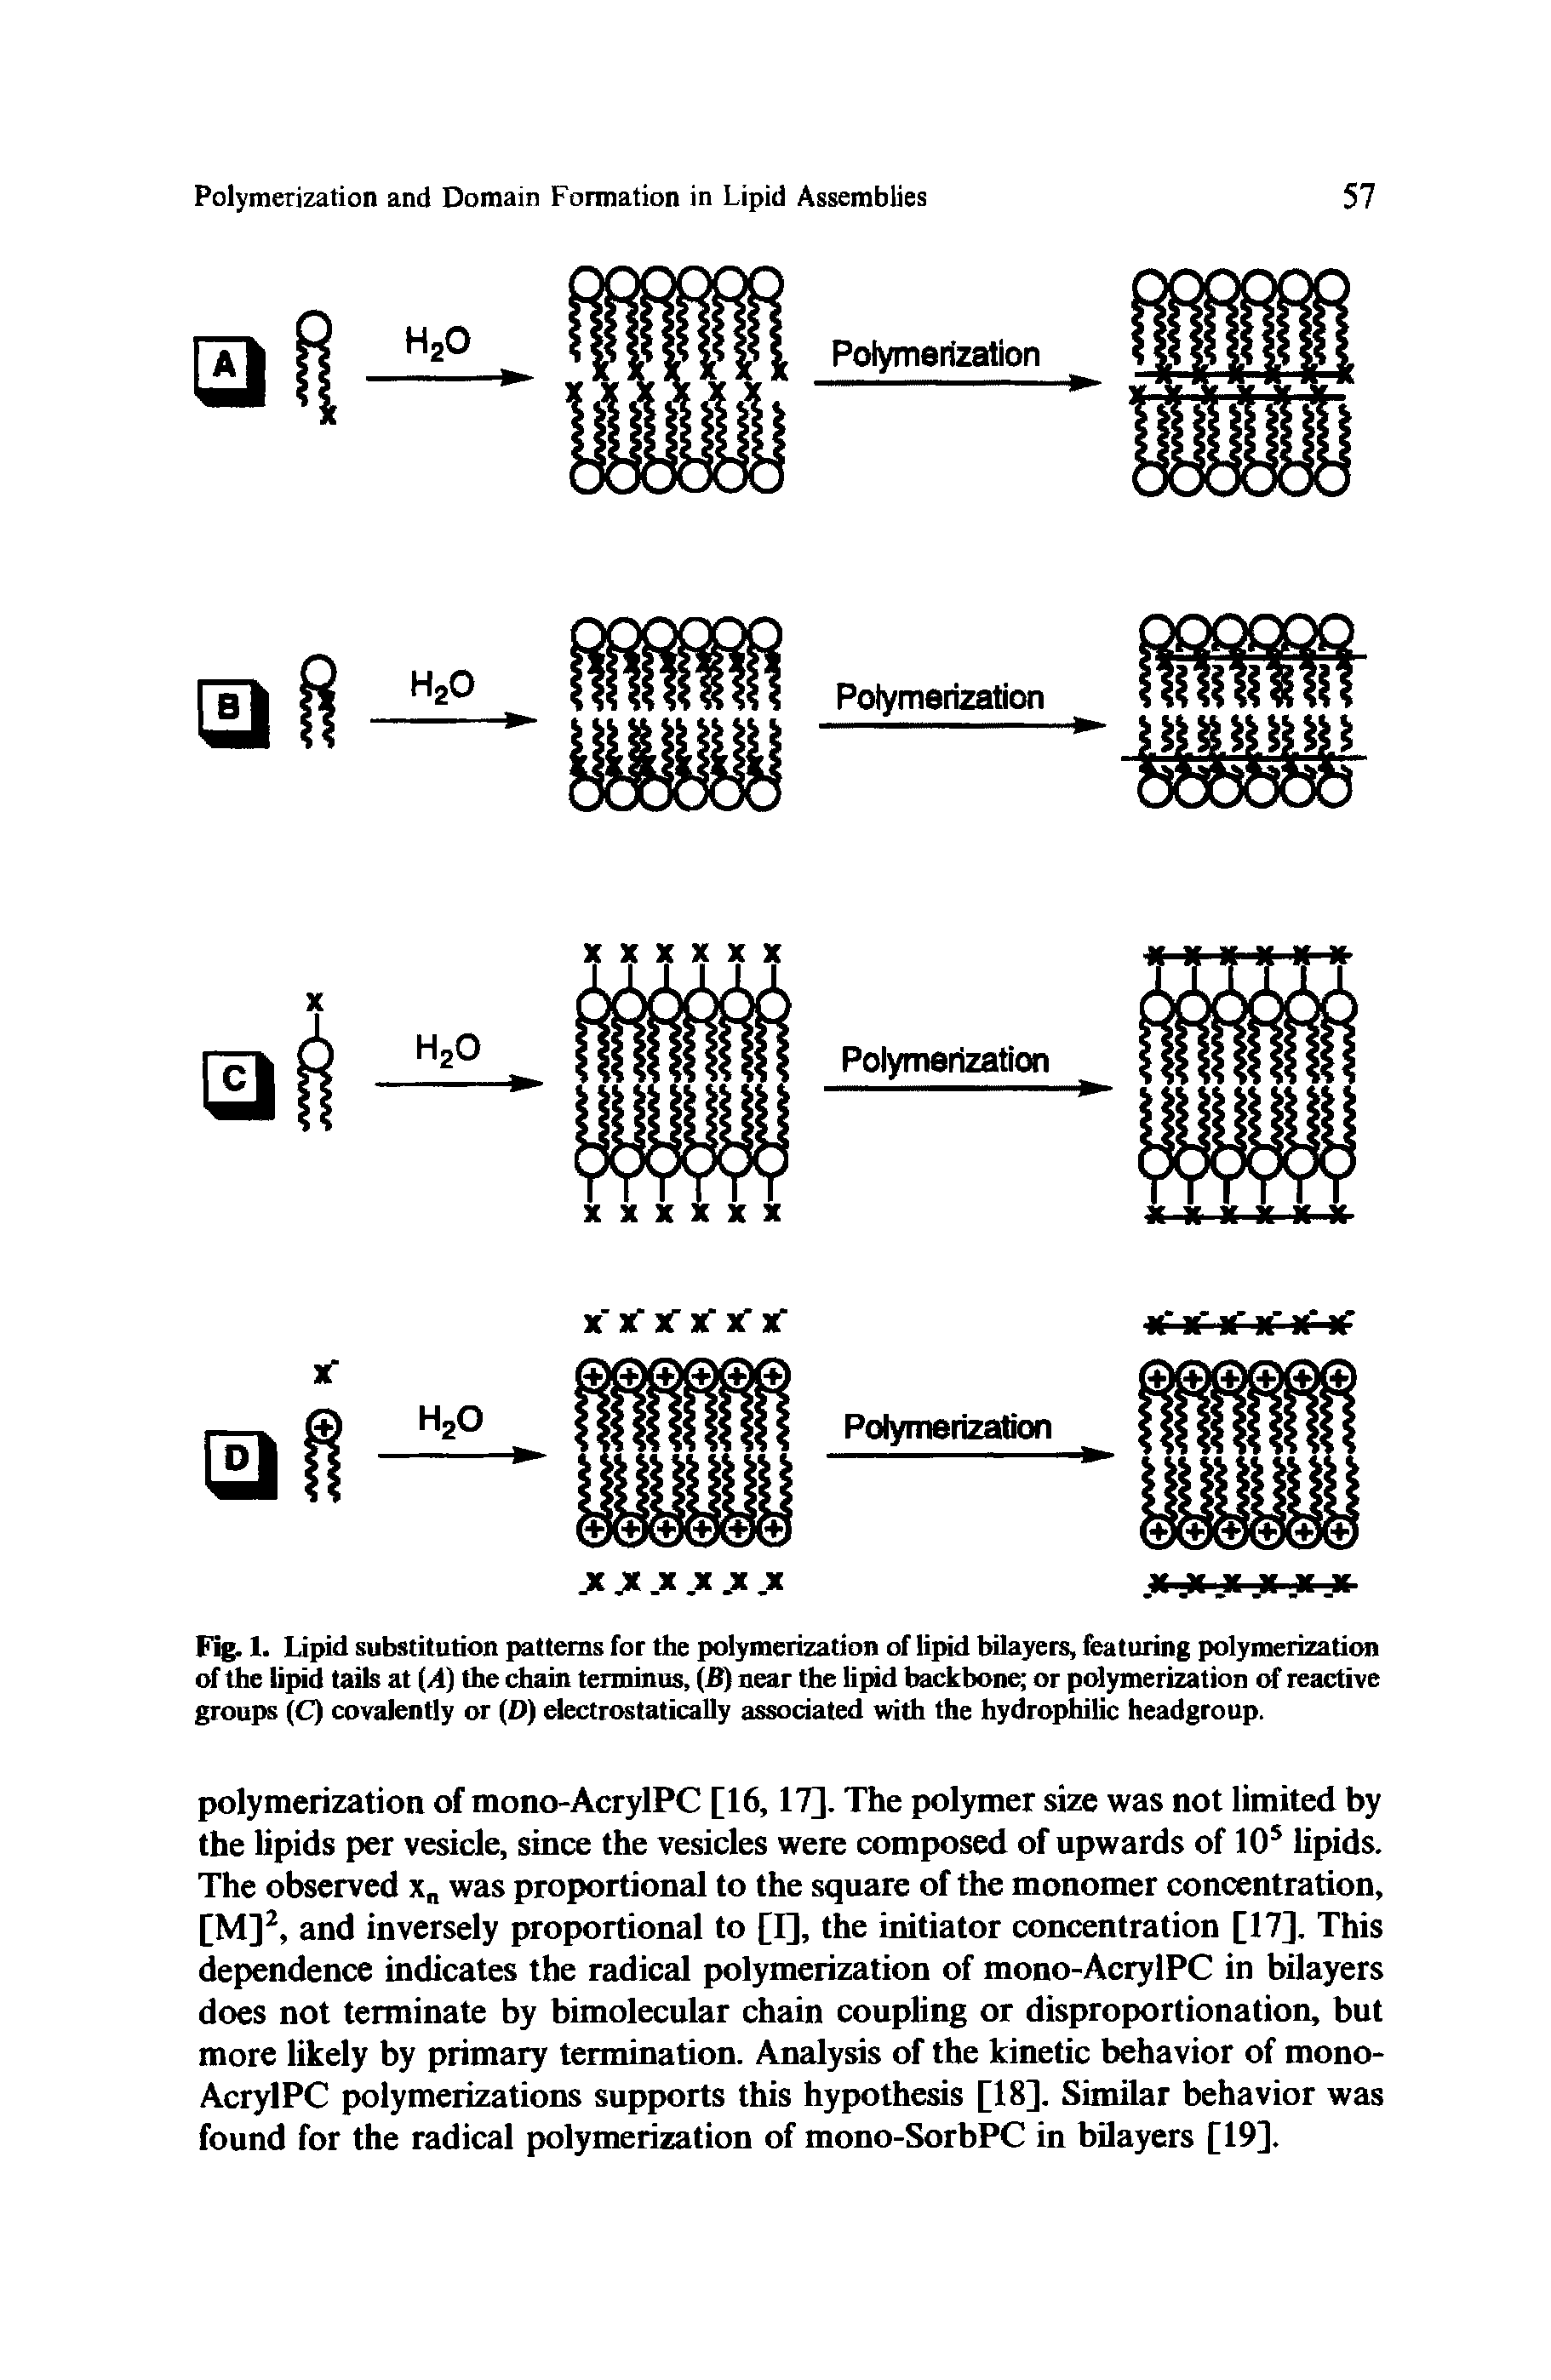 Fig. 1. Lipid substitution patterns for the polymerization of lipid bilayers, featuring polymerization of the lipid tails at (A) the chain terminus, (B) near the lipid backbone or polymerization of reactive groups (C) covalently or (D) electrostatically associated with the hydrophilic headgroup.